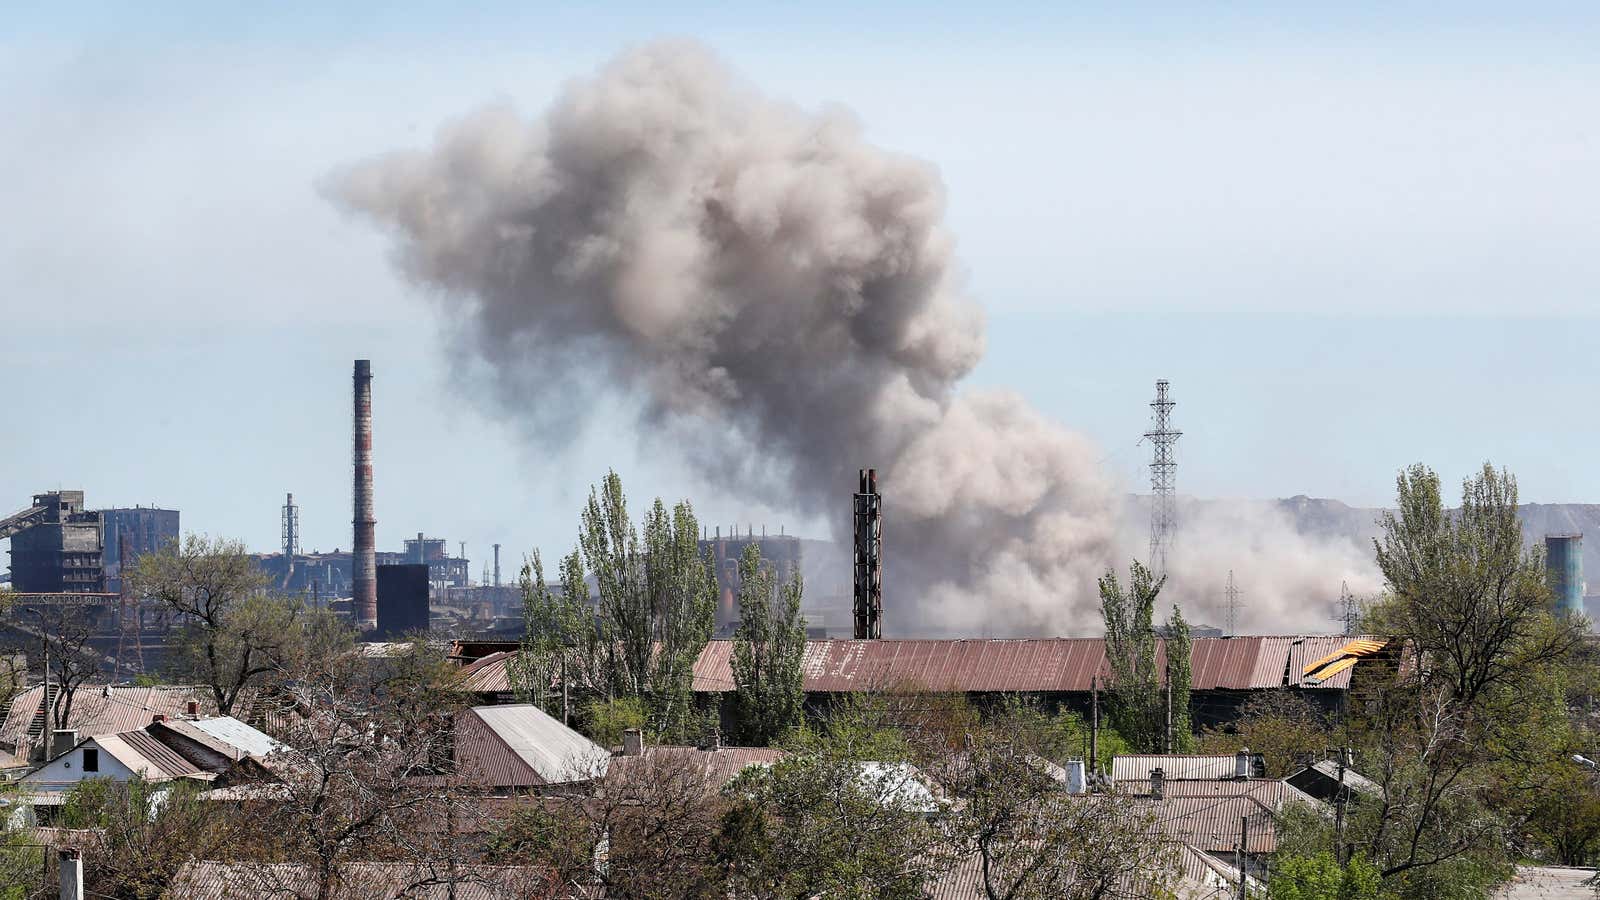 An explosion at the Azovstal Iron and Steel Works in the southern port city of Mariupol, Ukraine.